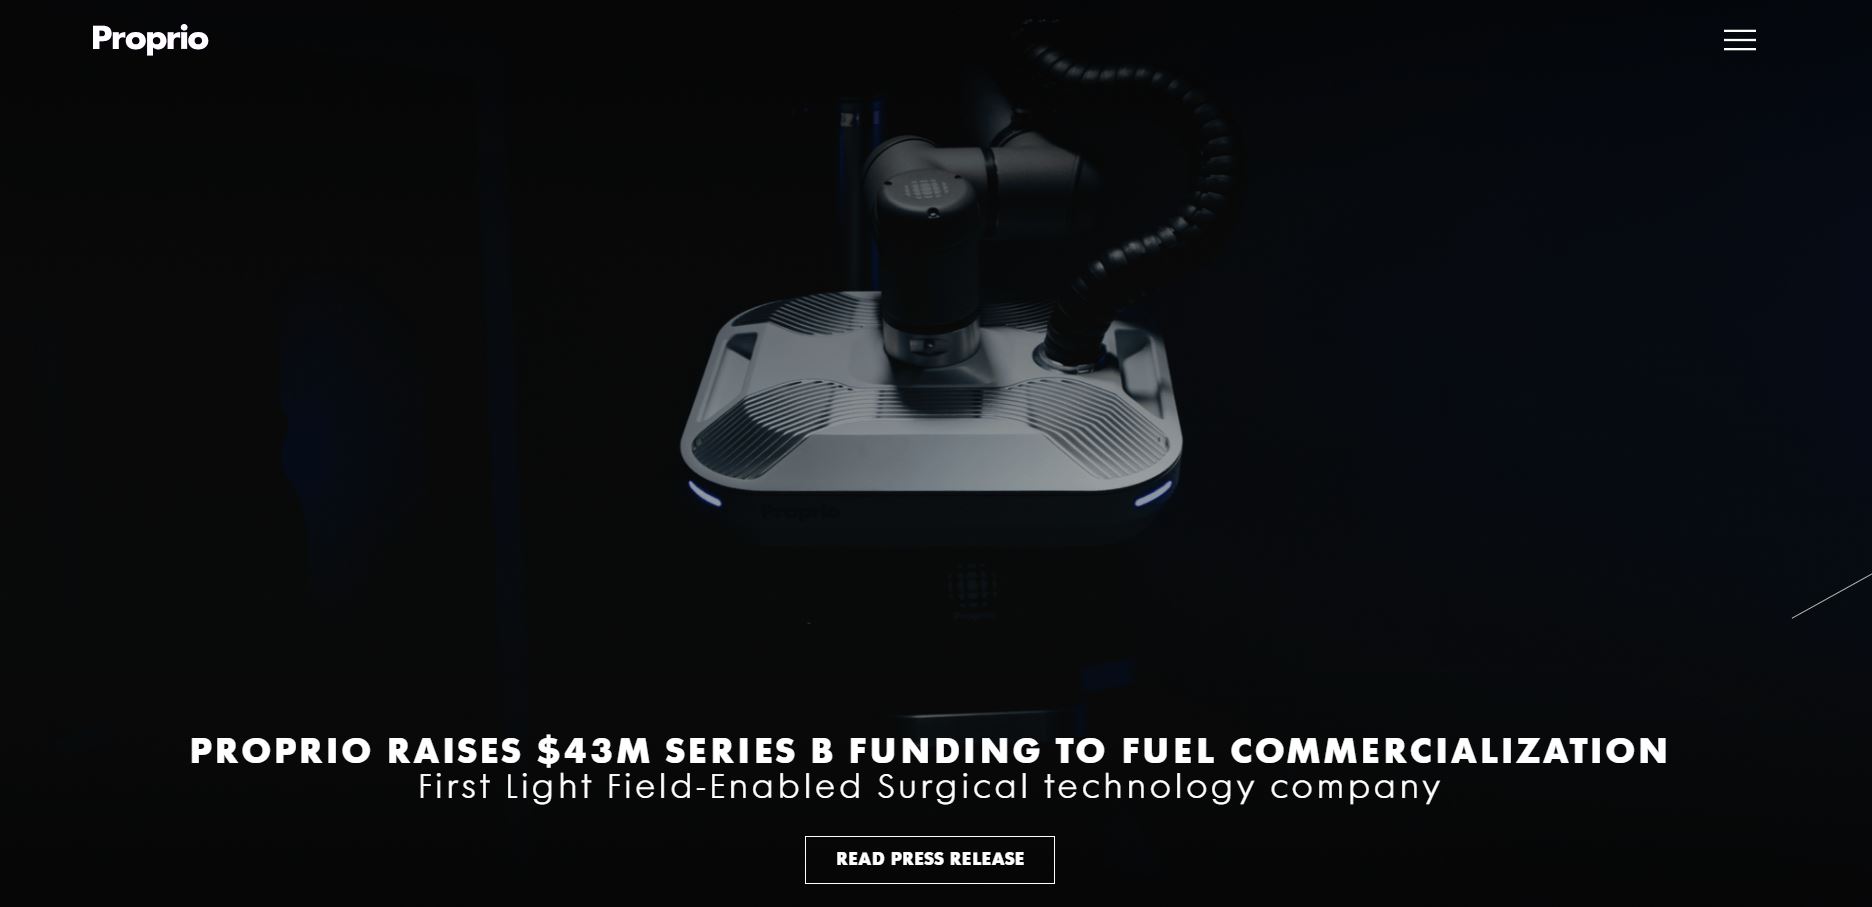 Proprio: Cutting-edge medical equipment startup founded by Gabriel Jones, secures $43M in Series B.